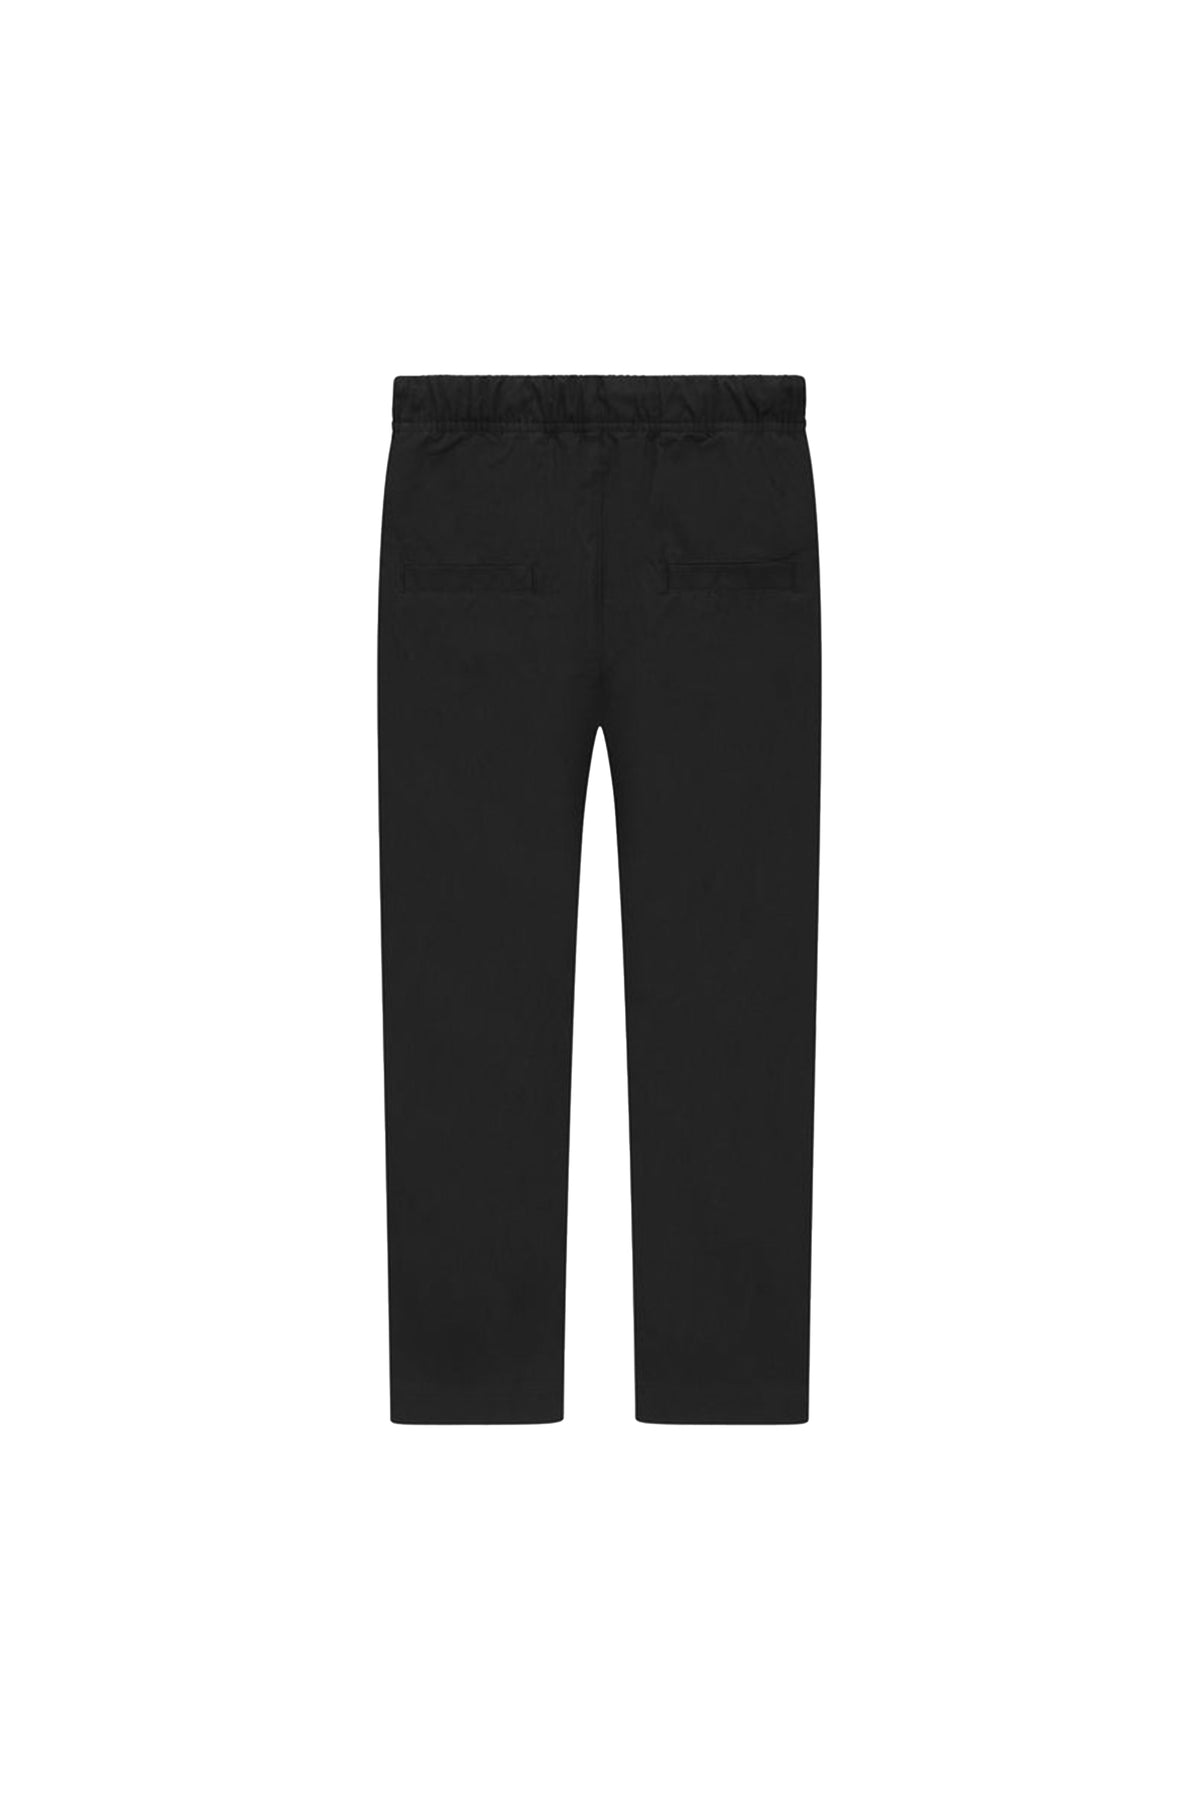 RELAXED TROUSER / BLK